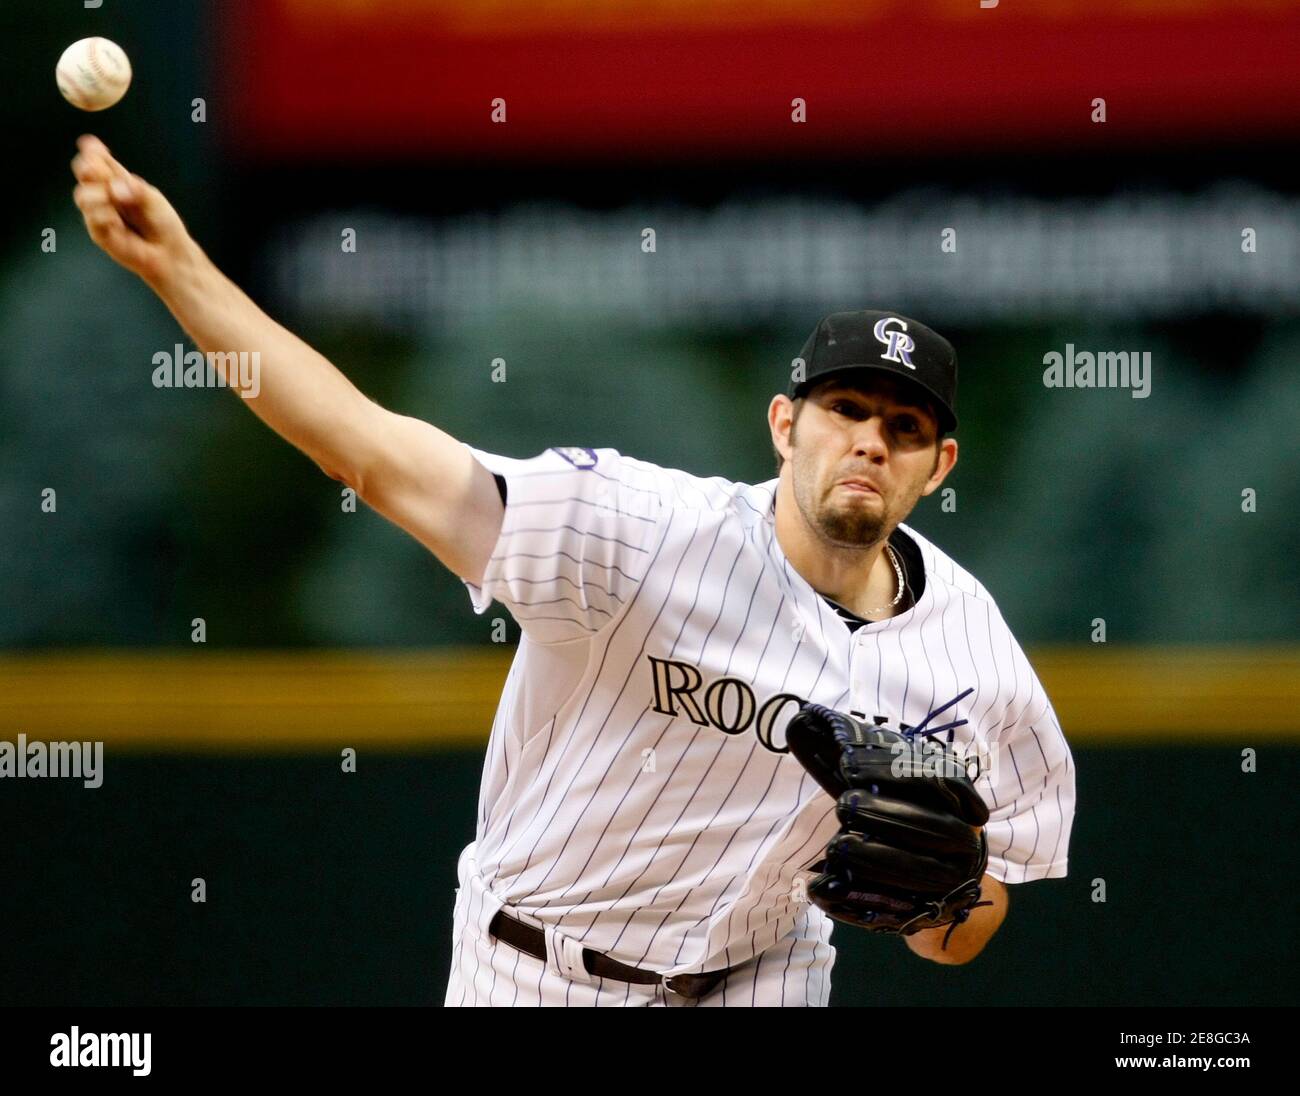 Colorado Rockies starting pitcher Jason Hammel throws in the first inning of their MLB baseball game against the Toronto Blue Jays in Denver June 12, 2010. REUTERS/Rick Wilking (UNITED STATES - Tags: SPORT BASEBALL) Stock Photo